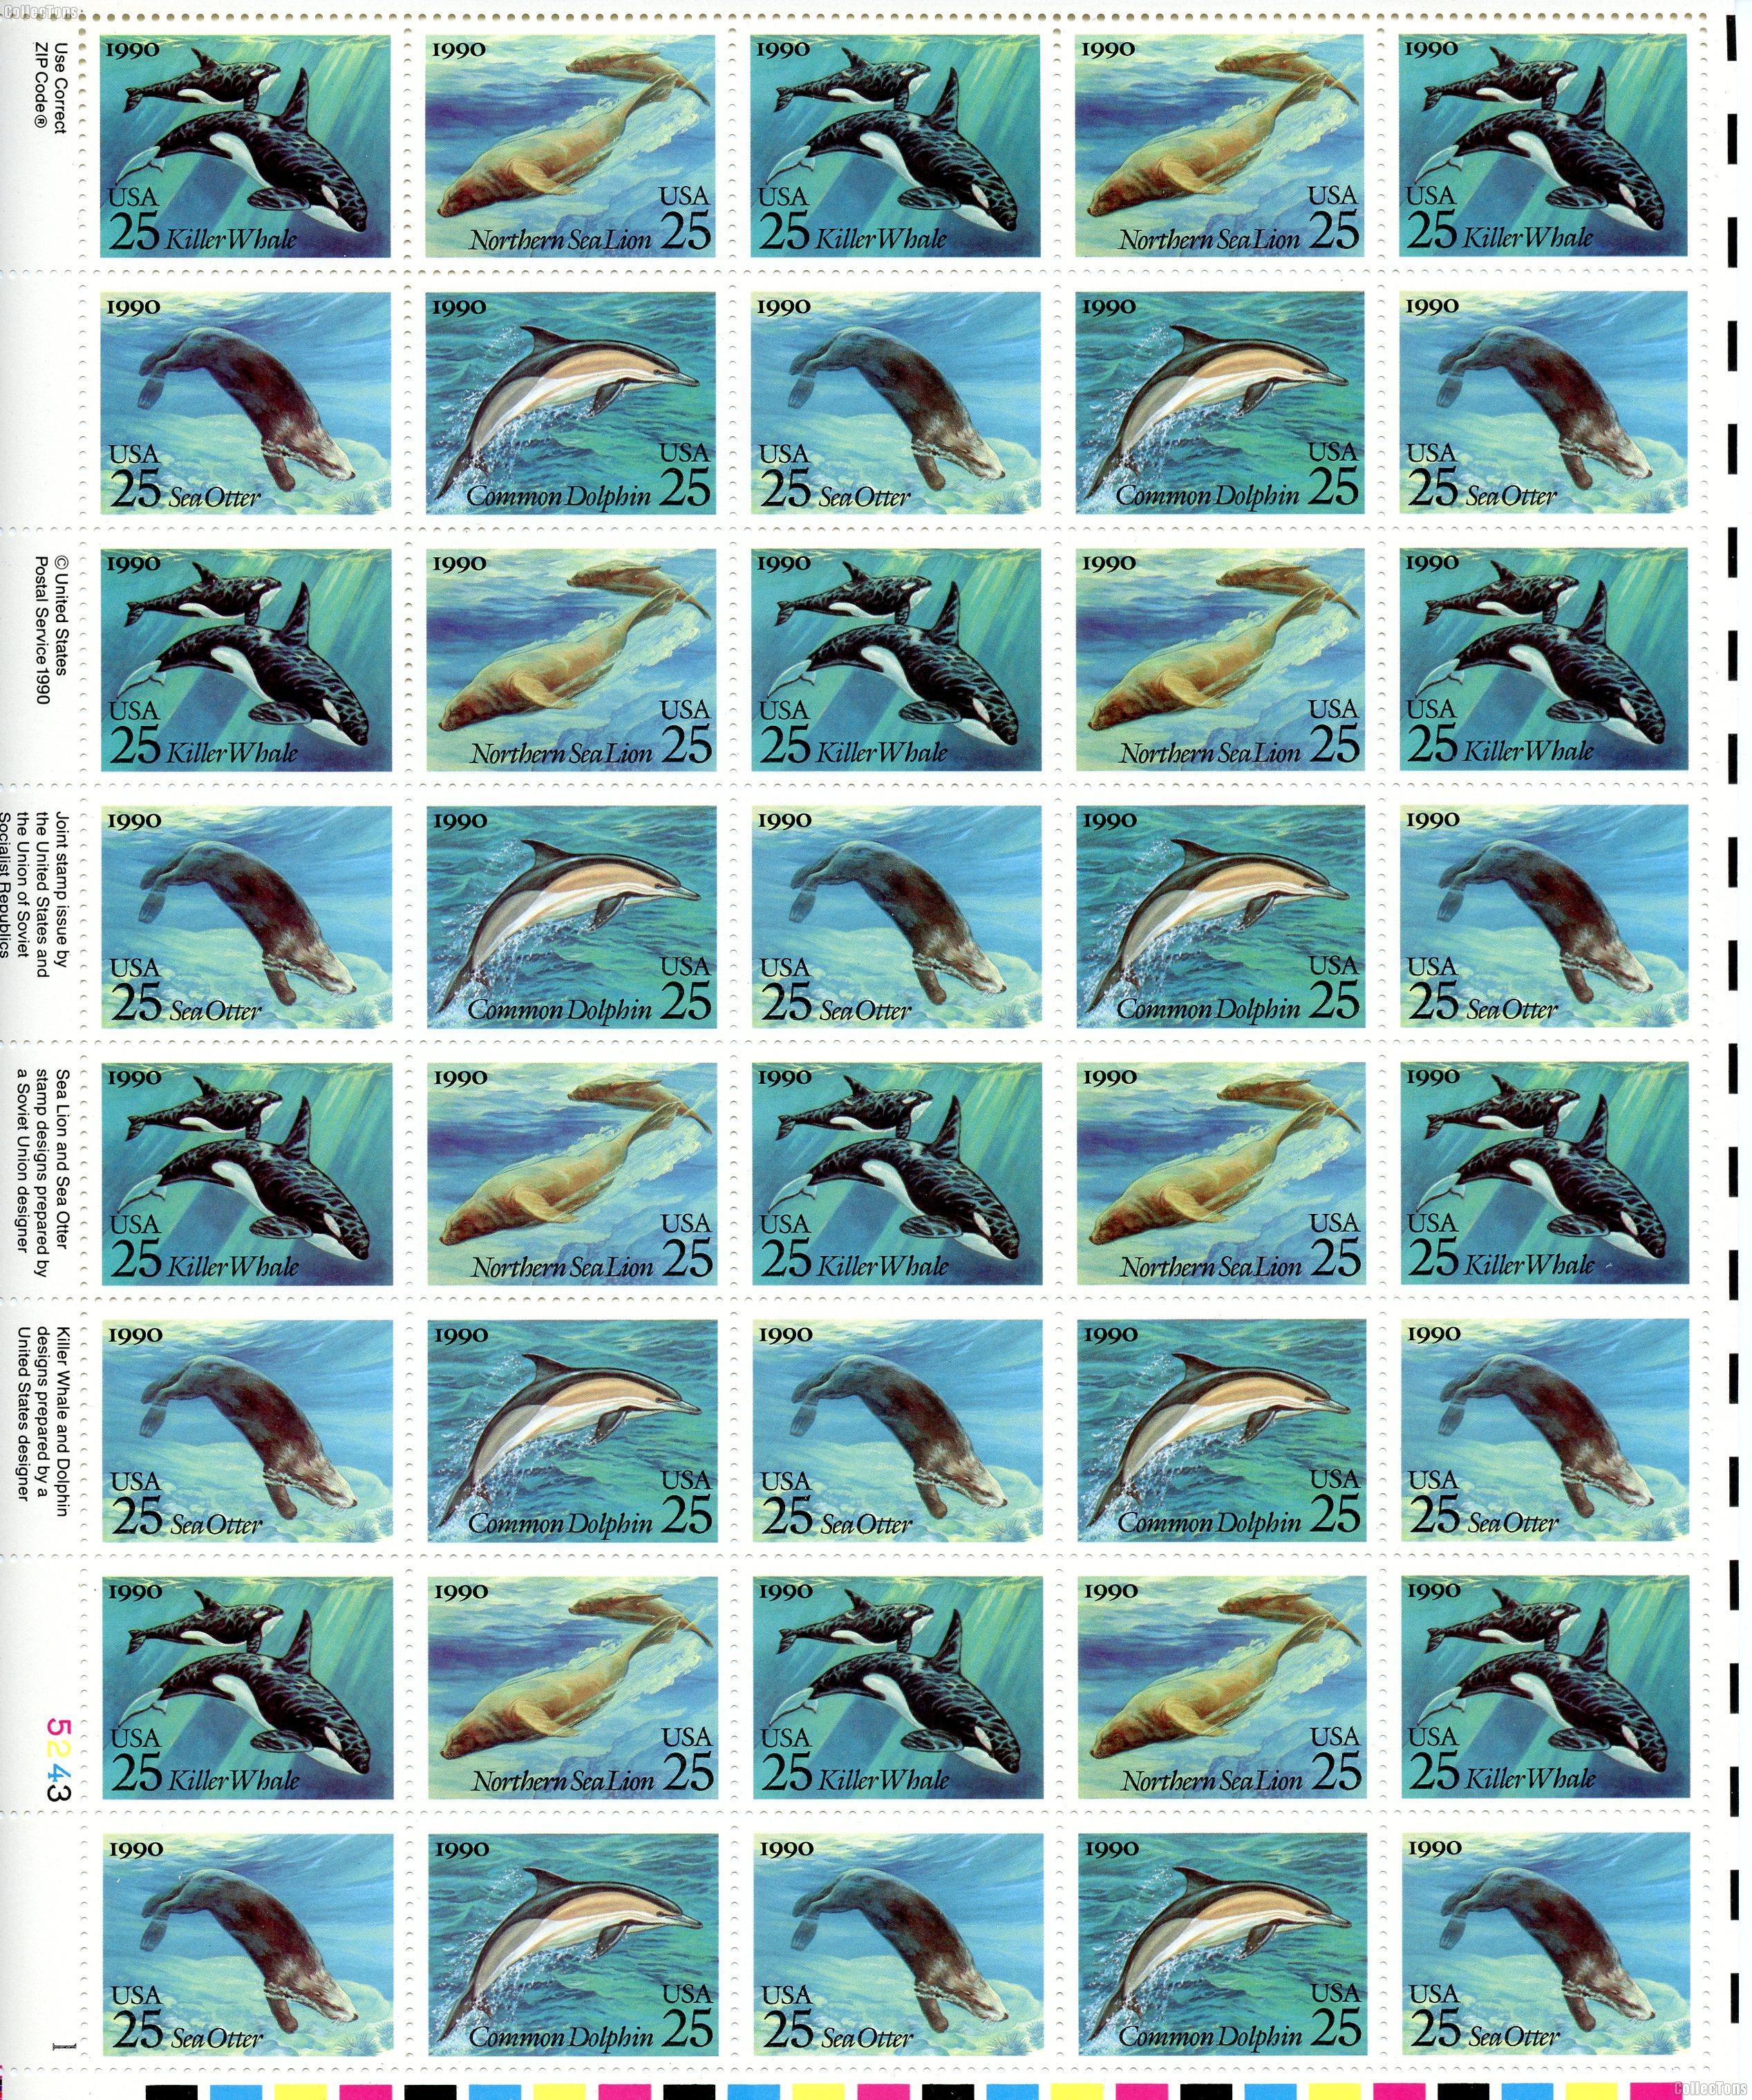 1990 Sea Creatures 25 Cent US Postage Stamp MNH Sheet of 40 Scott #2508-2511